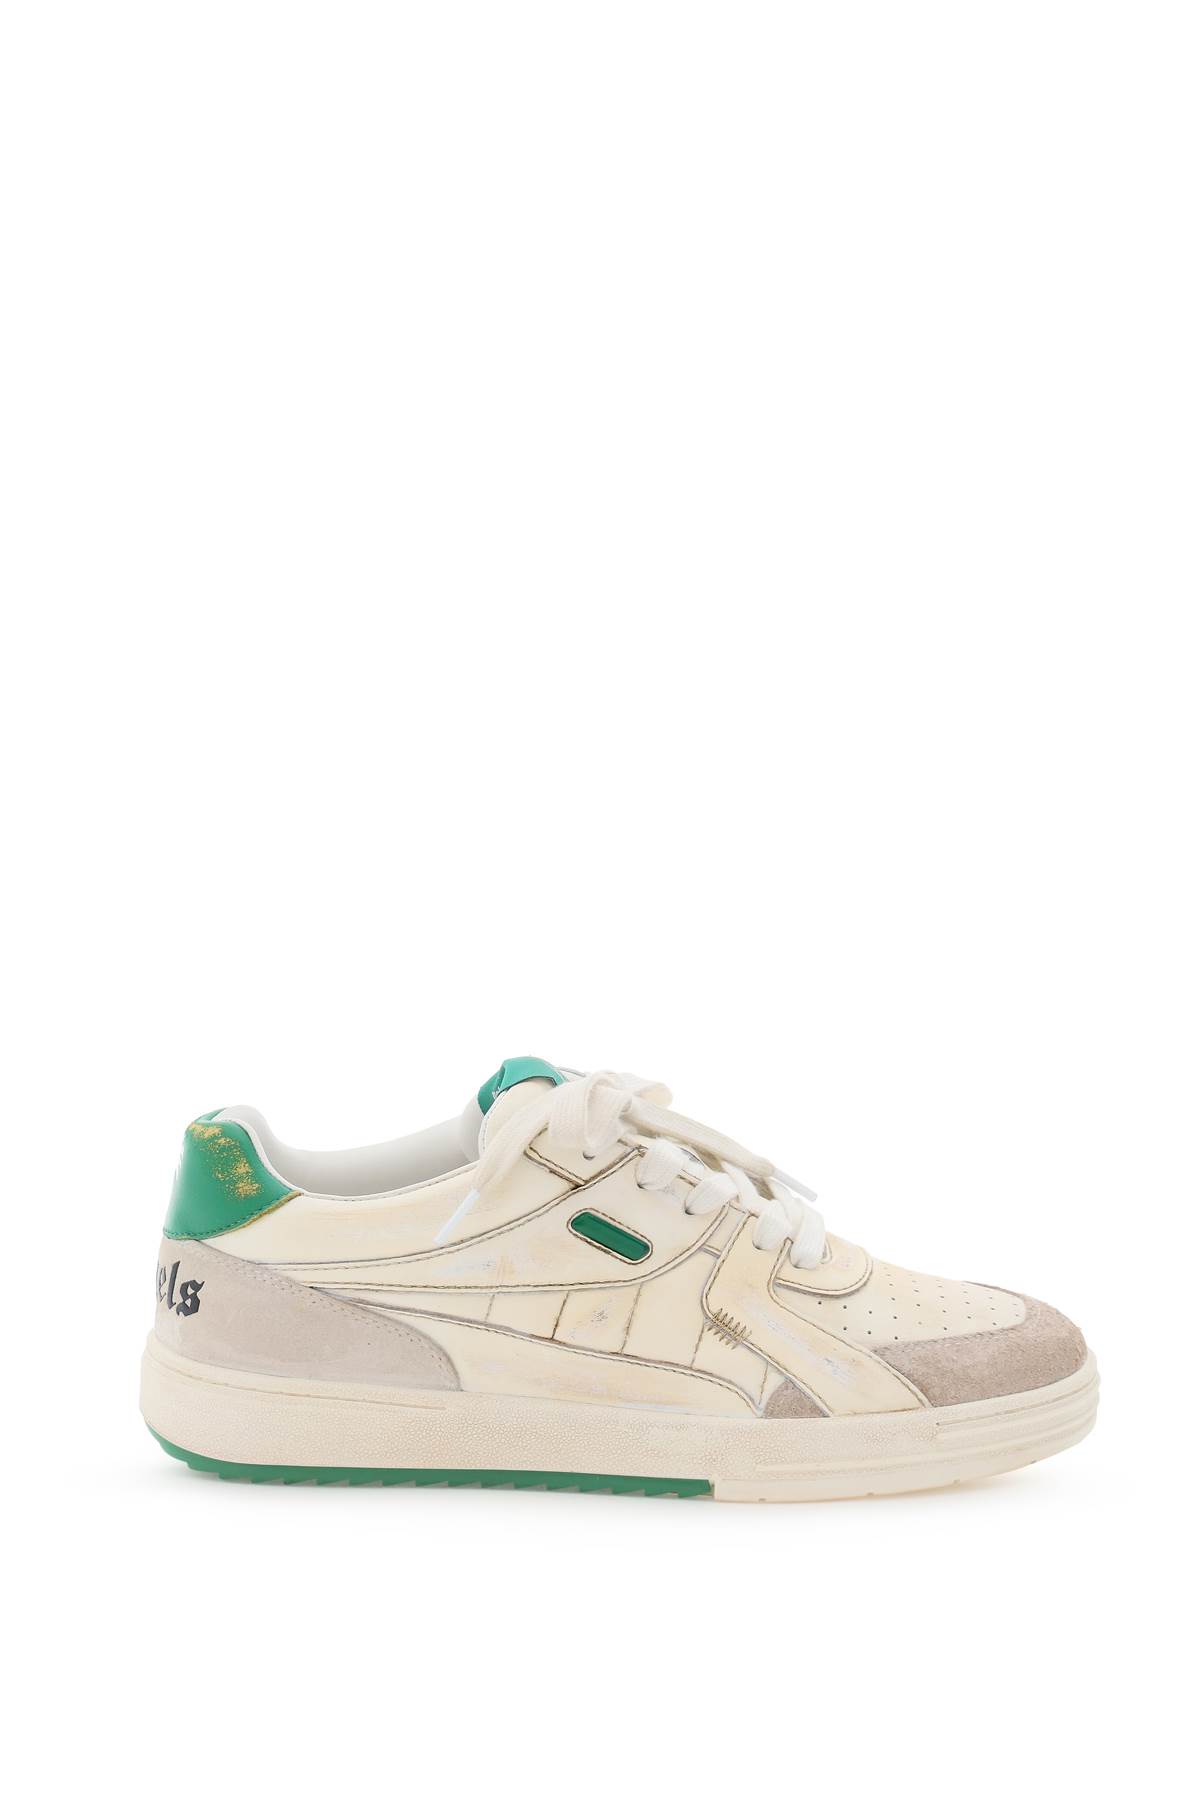 PALM ANGELS UNIVERSITY LEATHER SNEAKERS